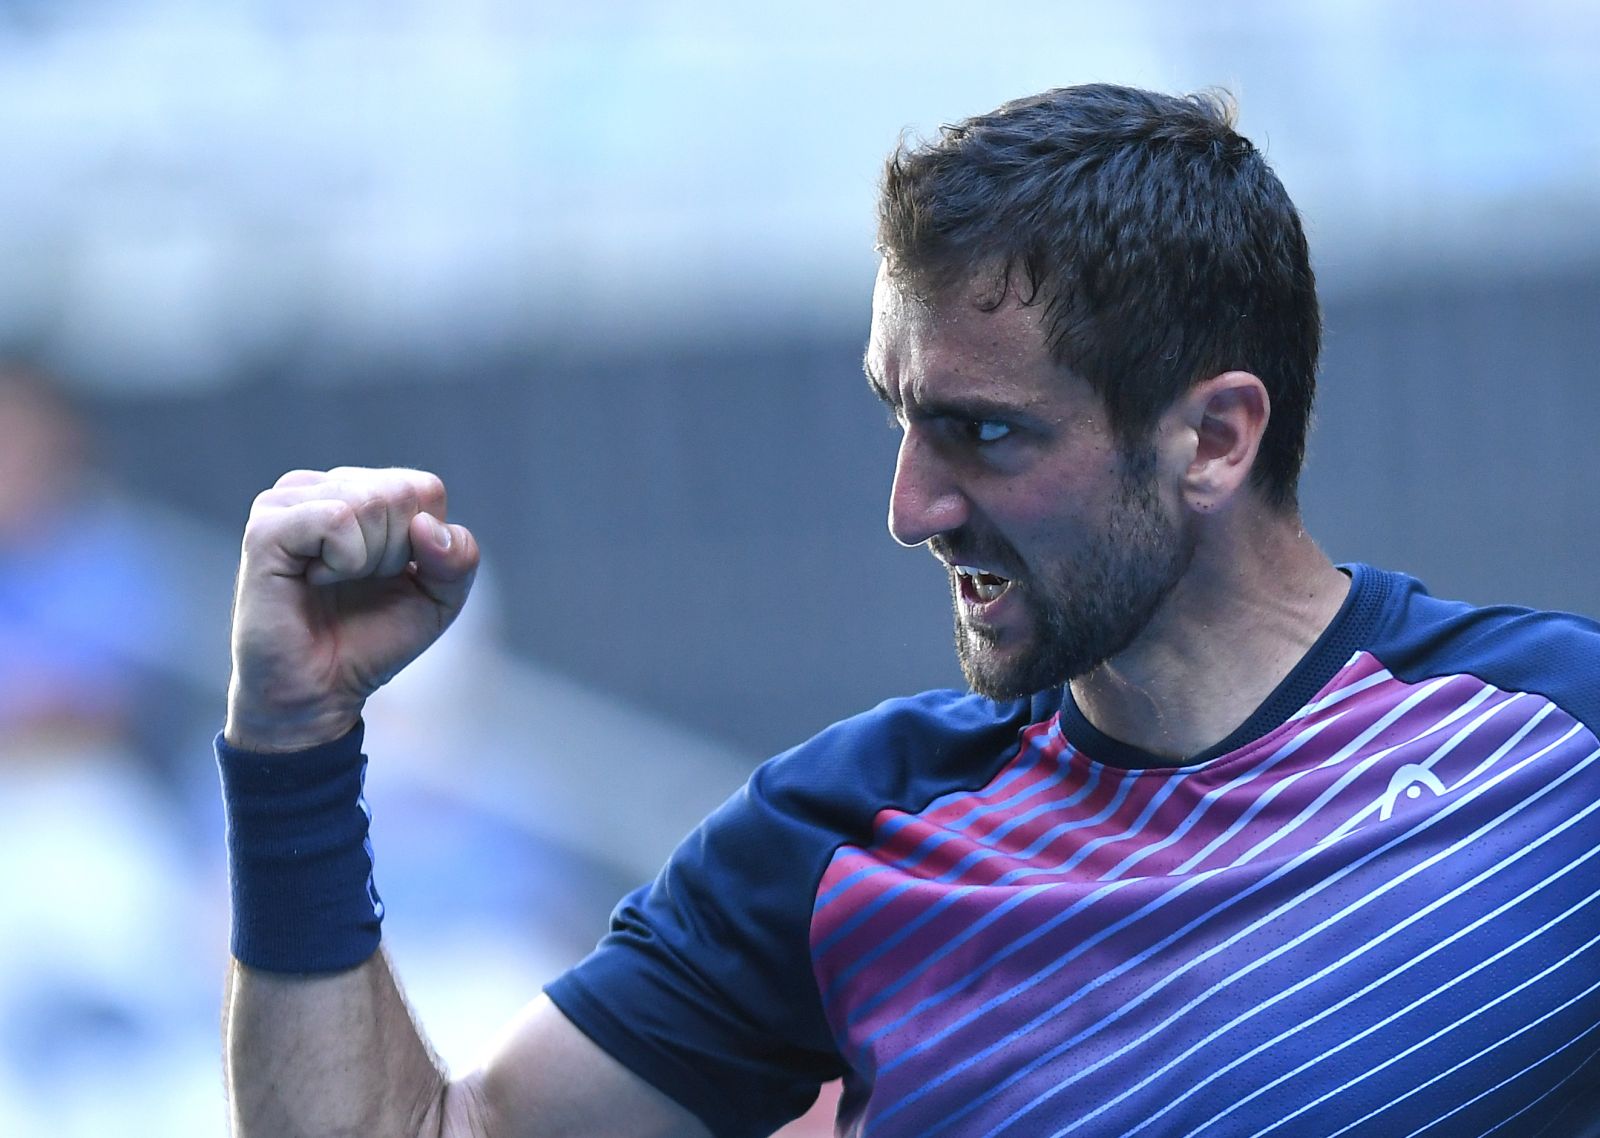 epa09705804 Marin Cilic of Croatia reacts during his fourth round singles match against Felix Auger-Aliassime of Canada at the Australian Open Grand Slam tennis tournament at Melbourne Park, in Melbourne, Australia, 24 January 2022.  EPA/JAMES ROSS  AUSTRALIA AND NEW ZEALAND OUT